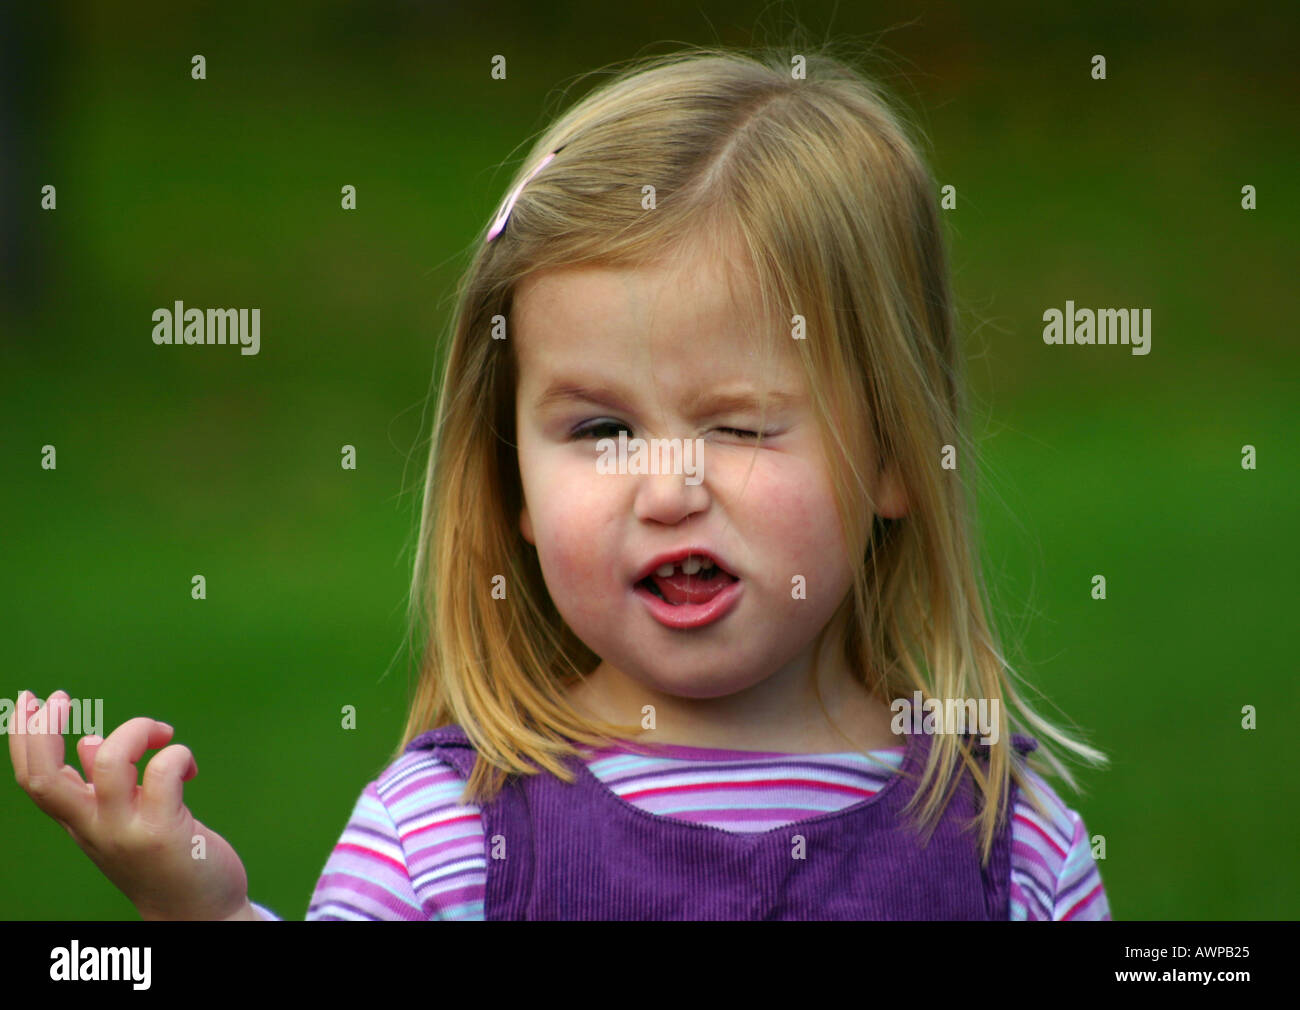 Cute Little Girl Pulling Funny Face Stock Photo Alamy